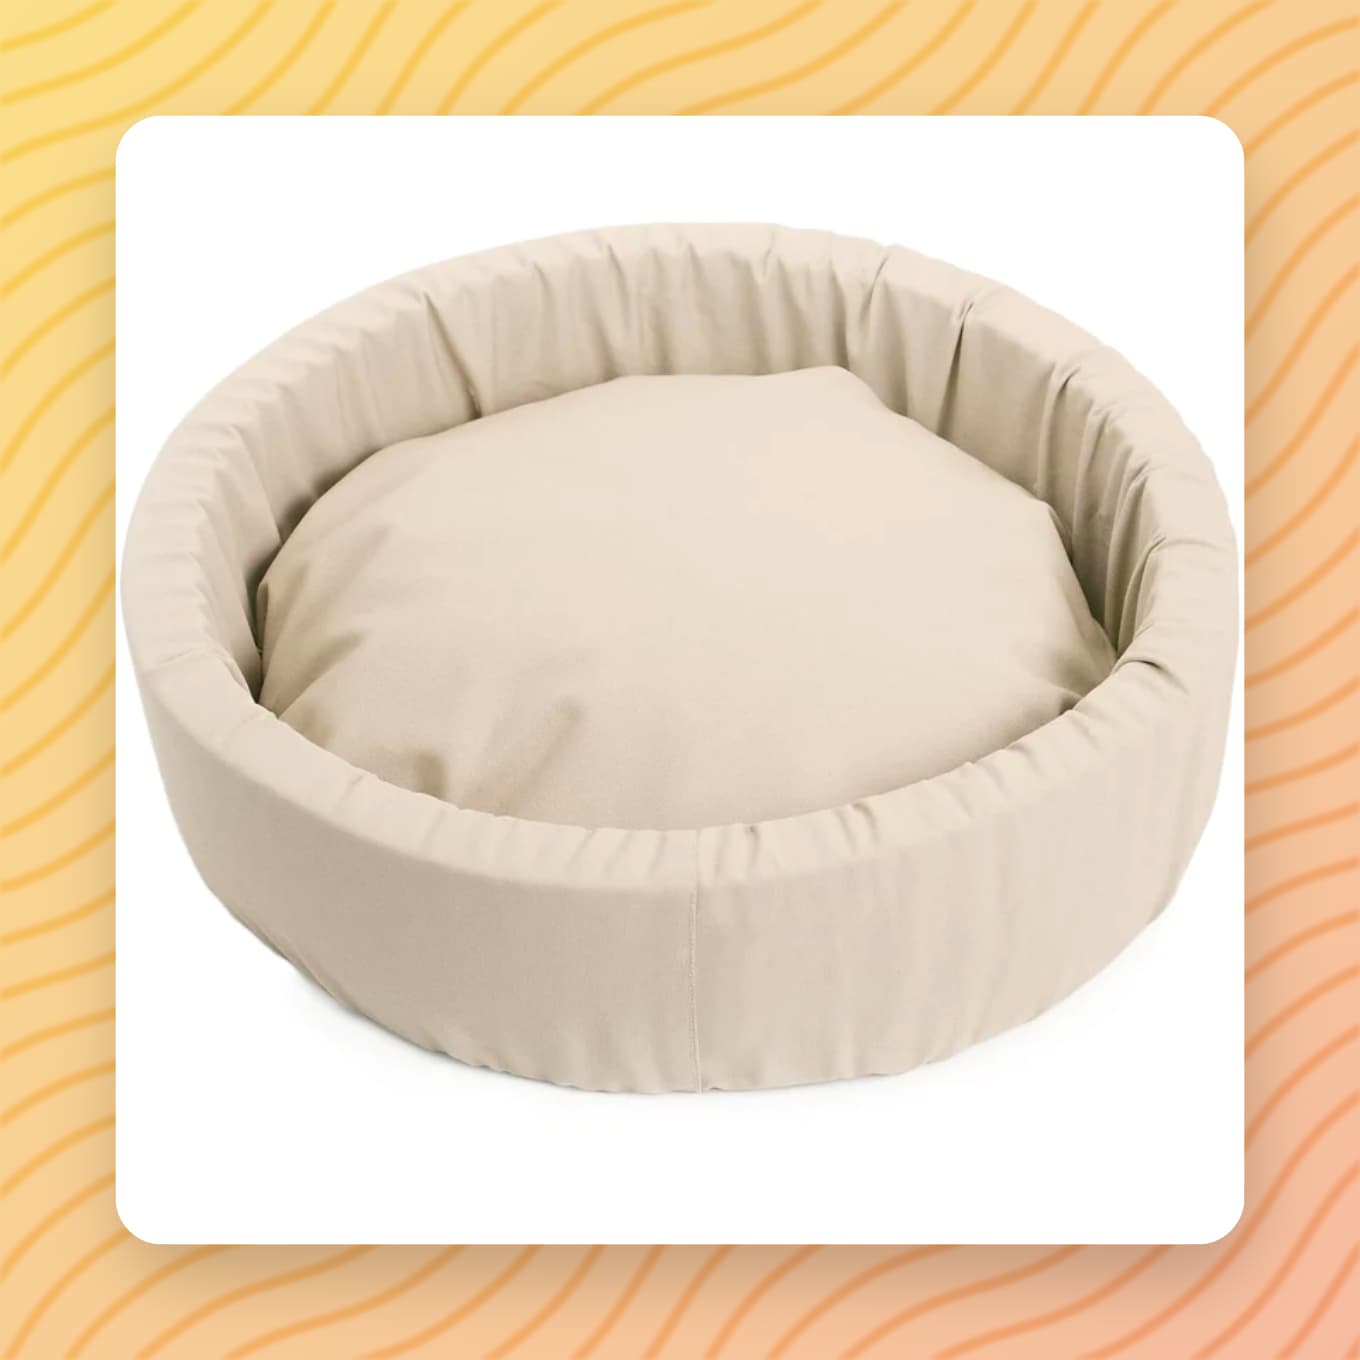 Round dog bed from OMI